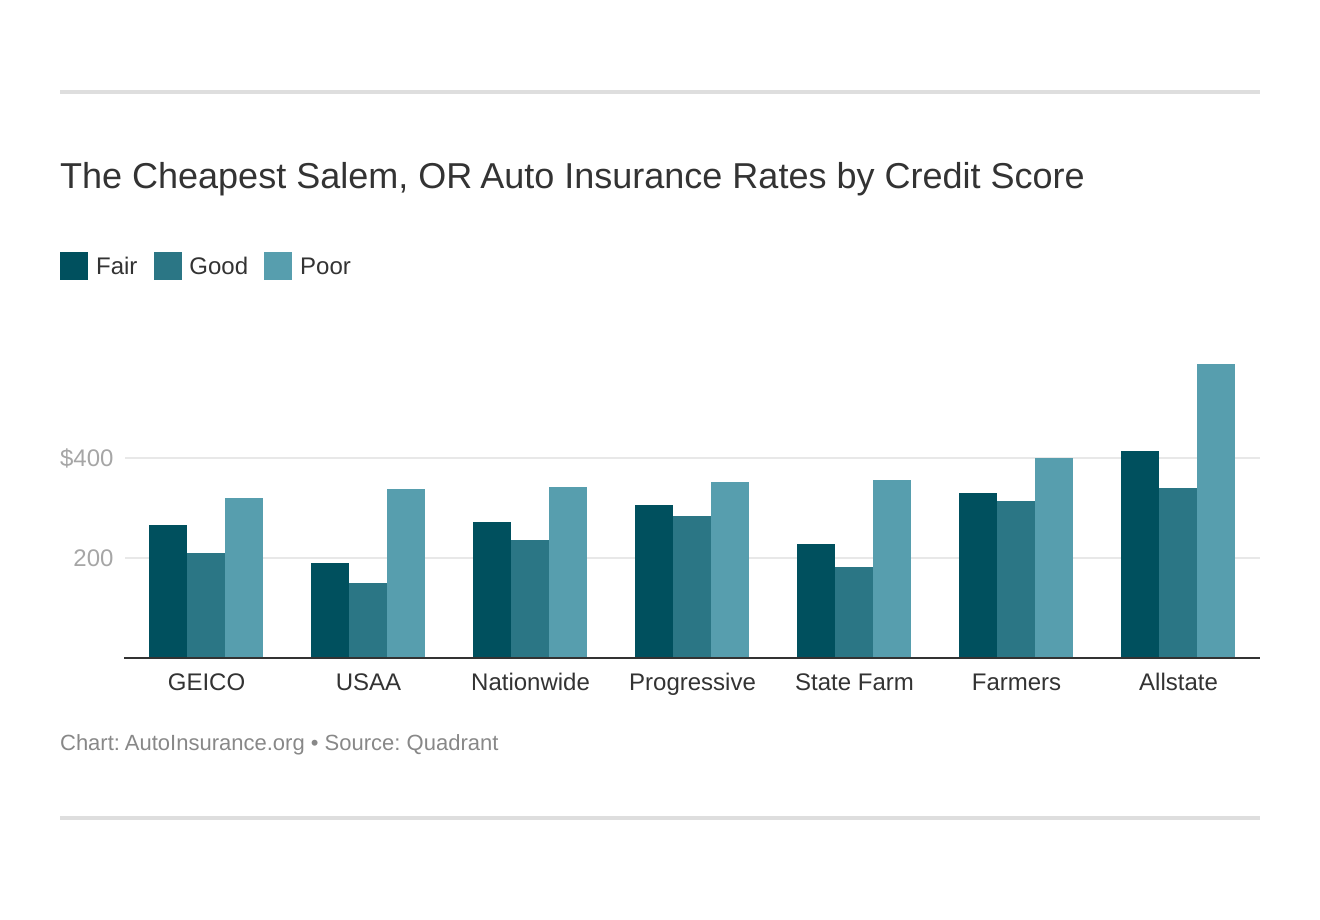 The Cheapest Salem, OR Auto Insurance Rates by Credit Score